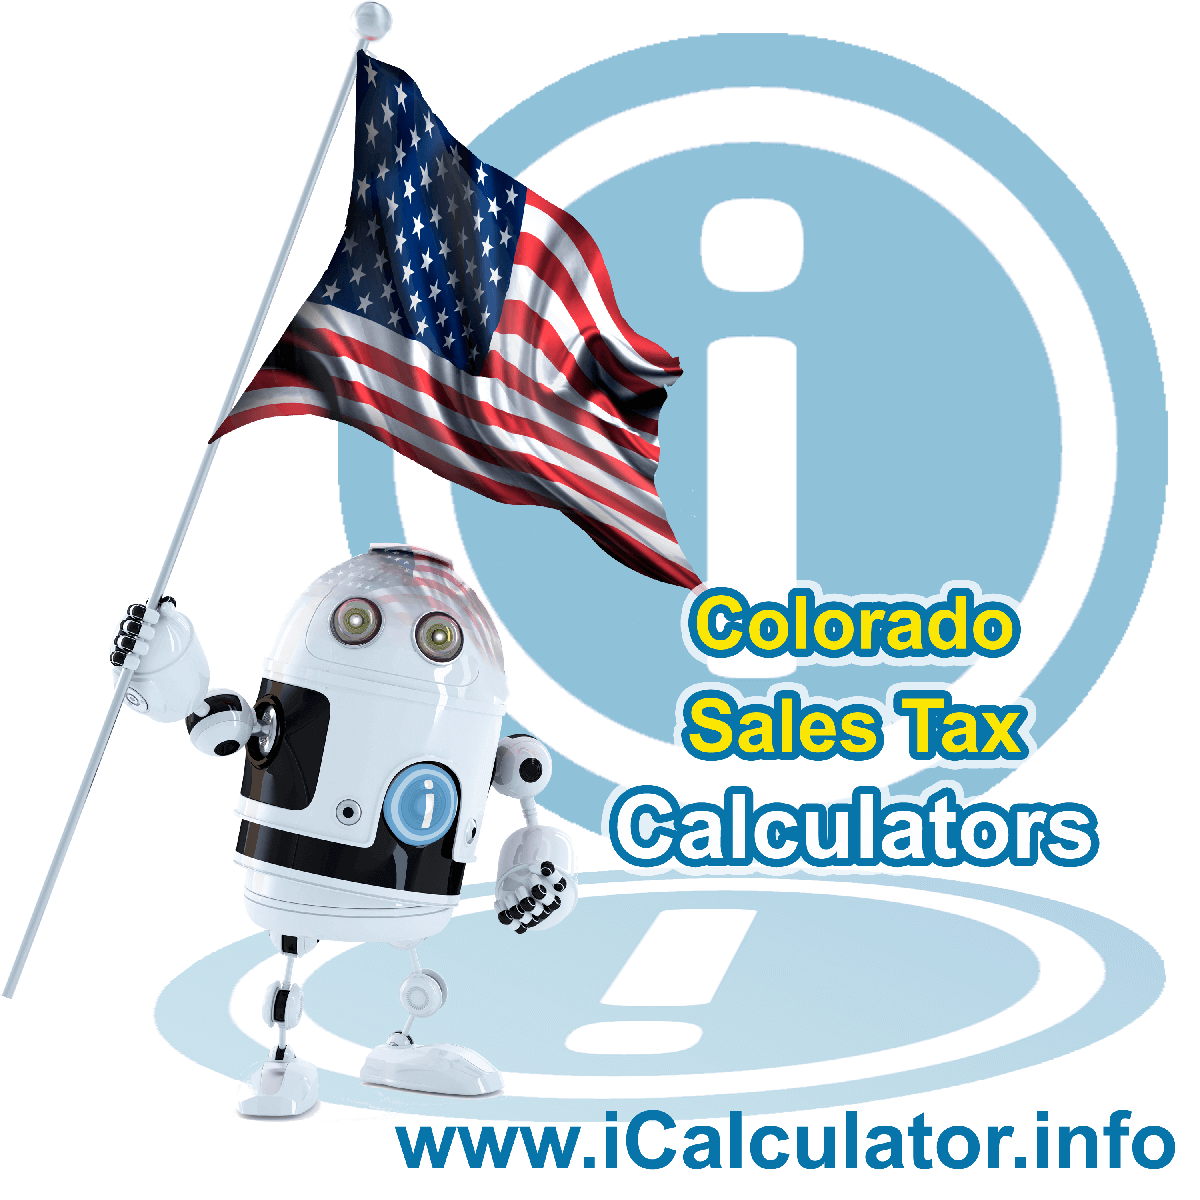 Holyoke Sales Rates: This image illustrates a calculator robot calculating Holyoke sales tax manually using the Holyoke Sales Tax Formula. You can use this information to calculate Holyoke Sales Tax manually or use the Holyoke Sales Tax Calculator to calculate sales tax online.